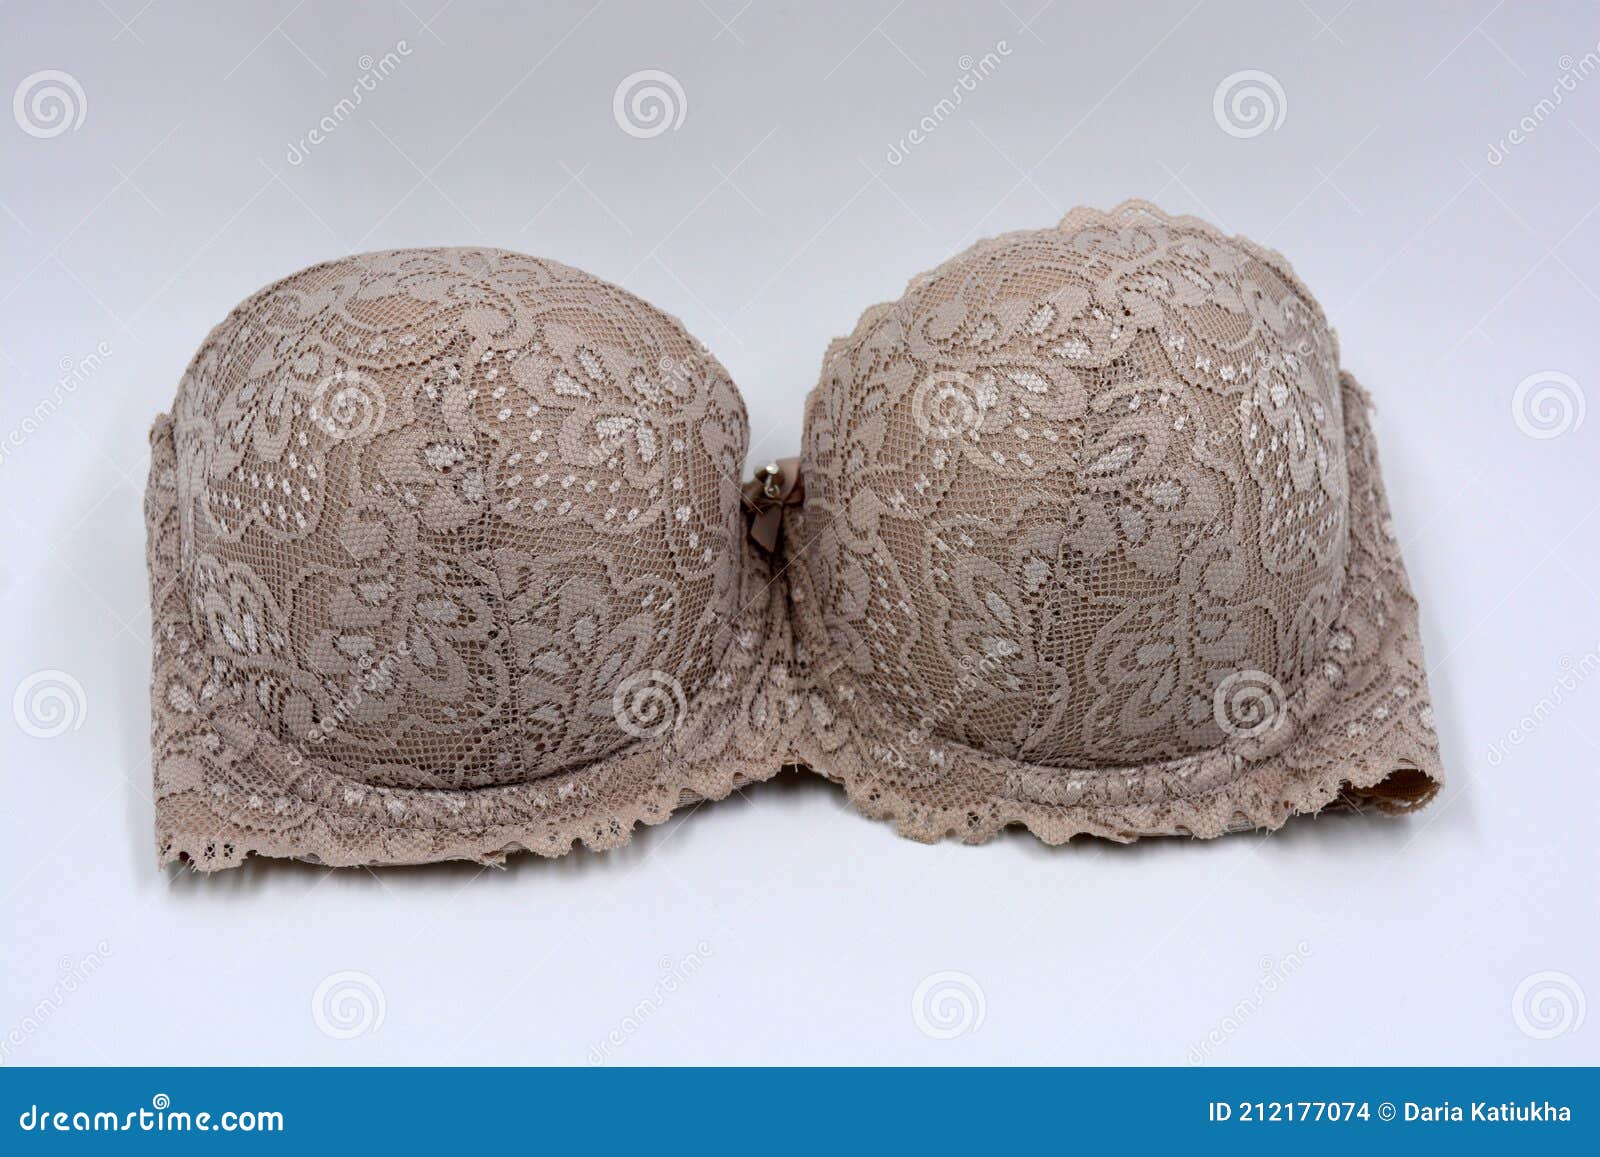 https://thumbs.dreamstime.com/z/photos-images-were-taken-city-dnipro-dnepropetrovsk-country-ukraine-handsome-brown-bodily-female-bra-pitpus-212177074.jpg